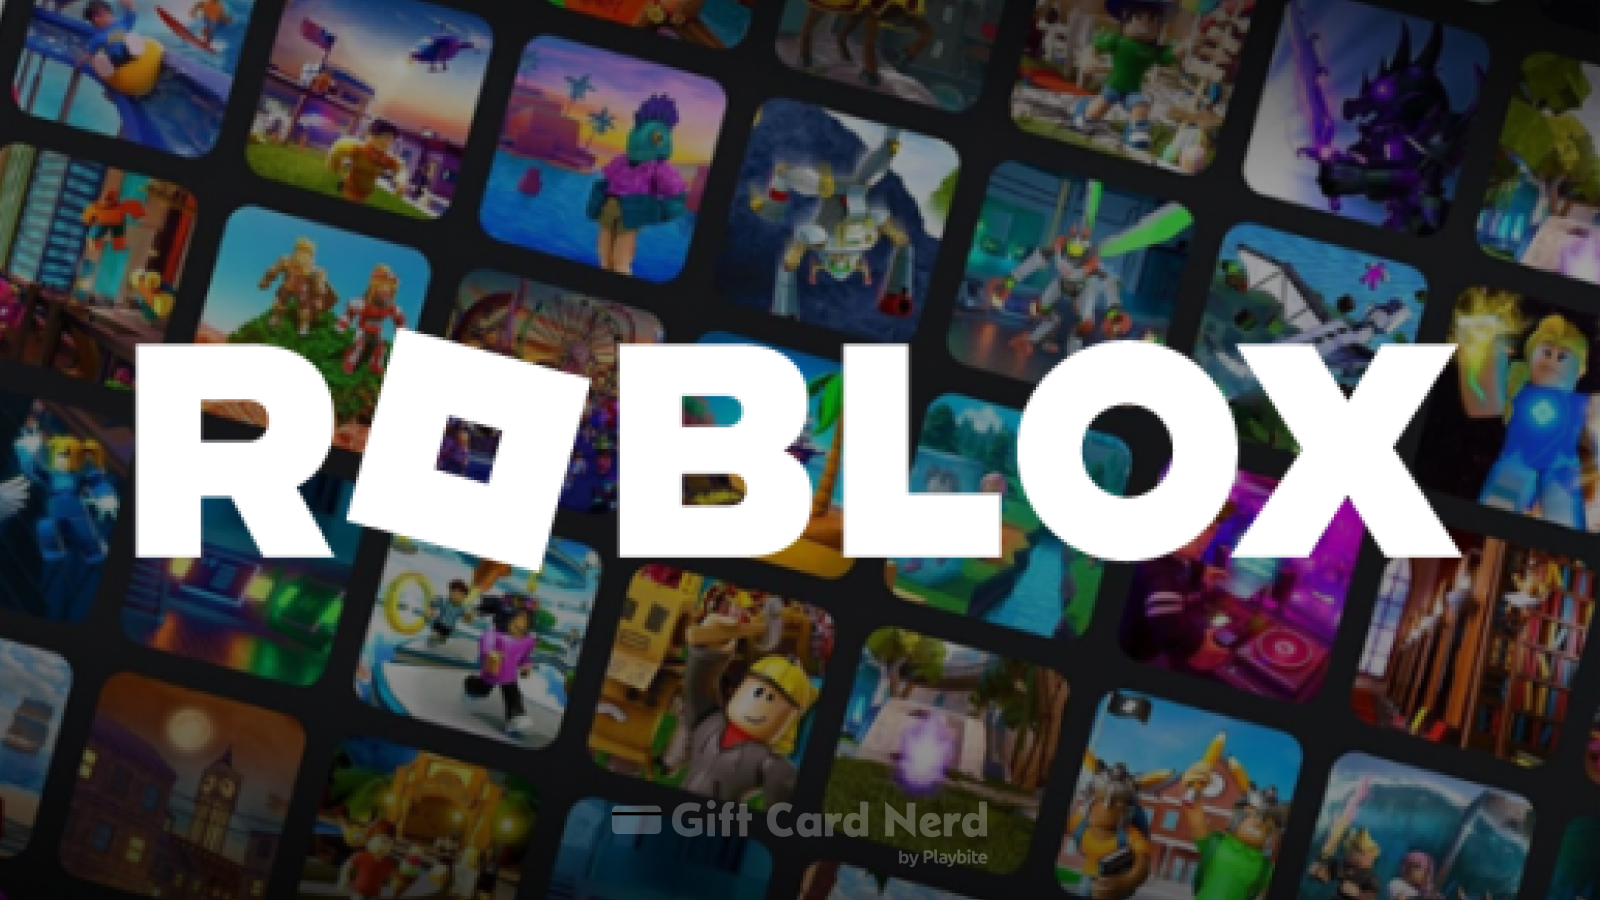 How to Check Roblox Gift Card Balance